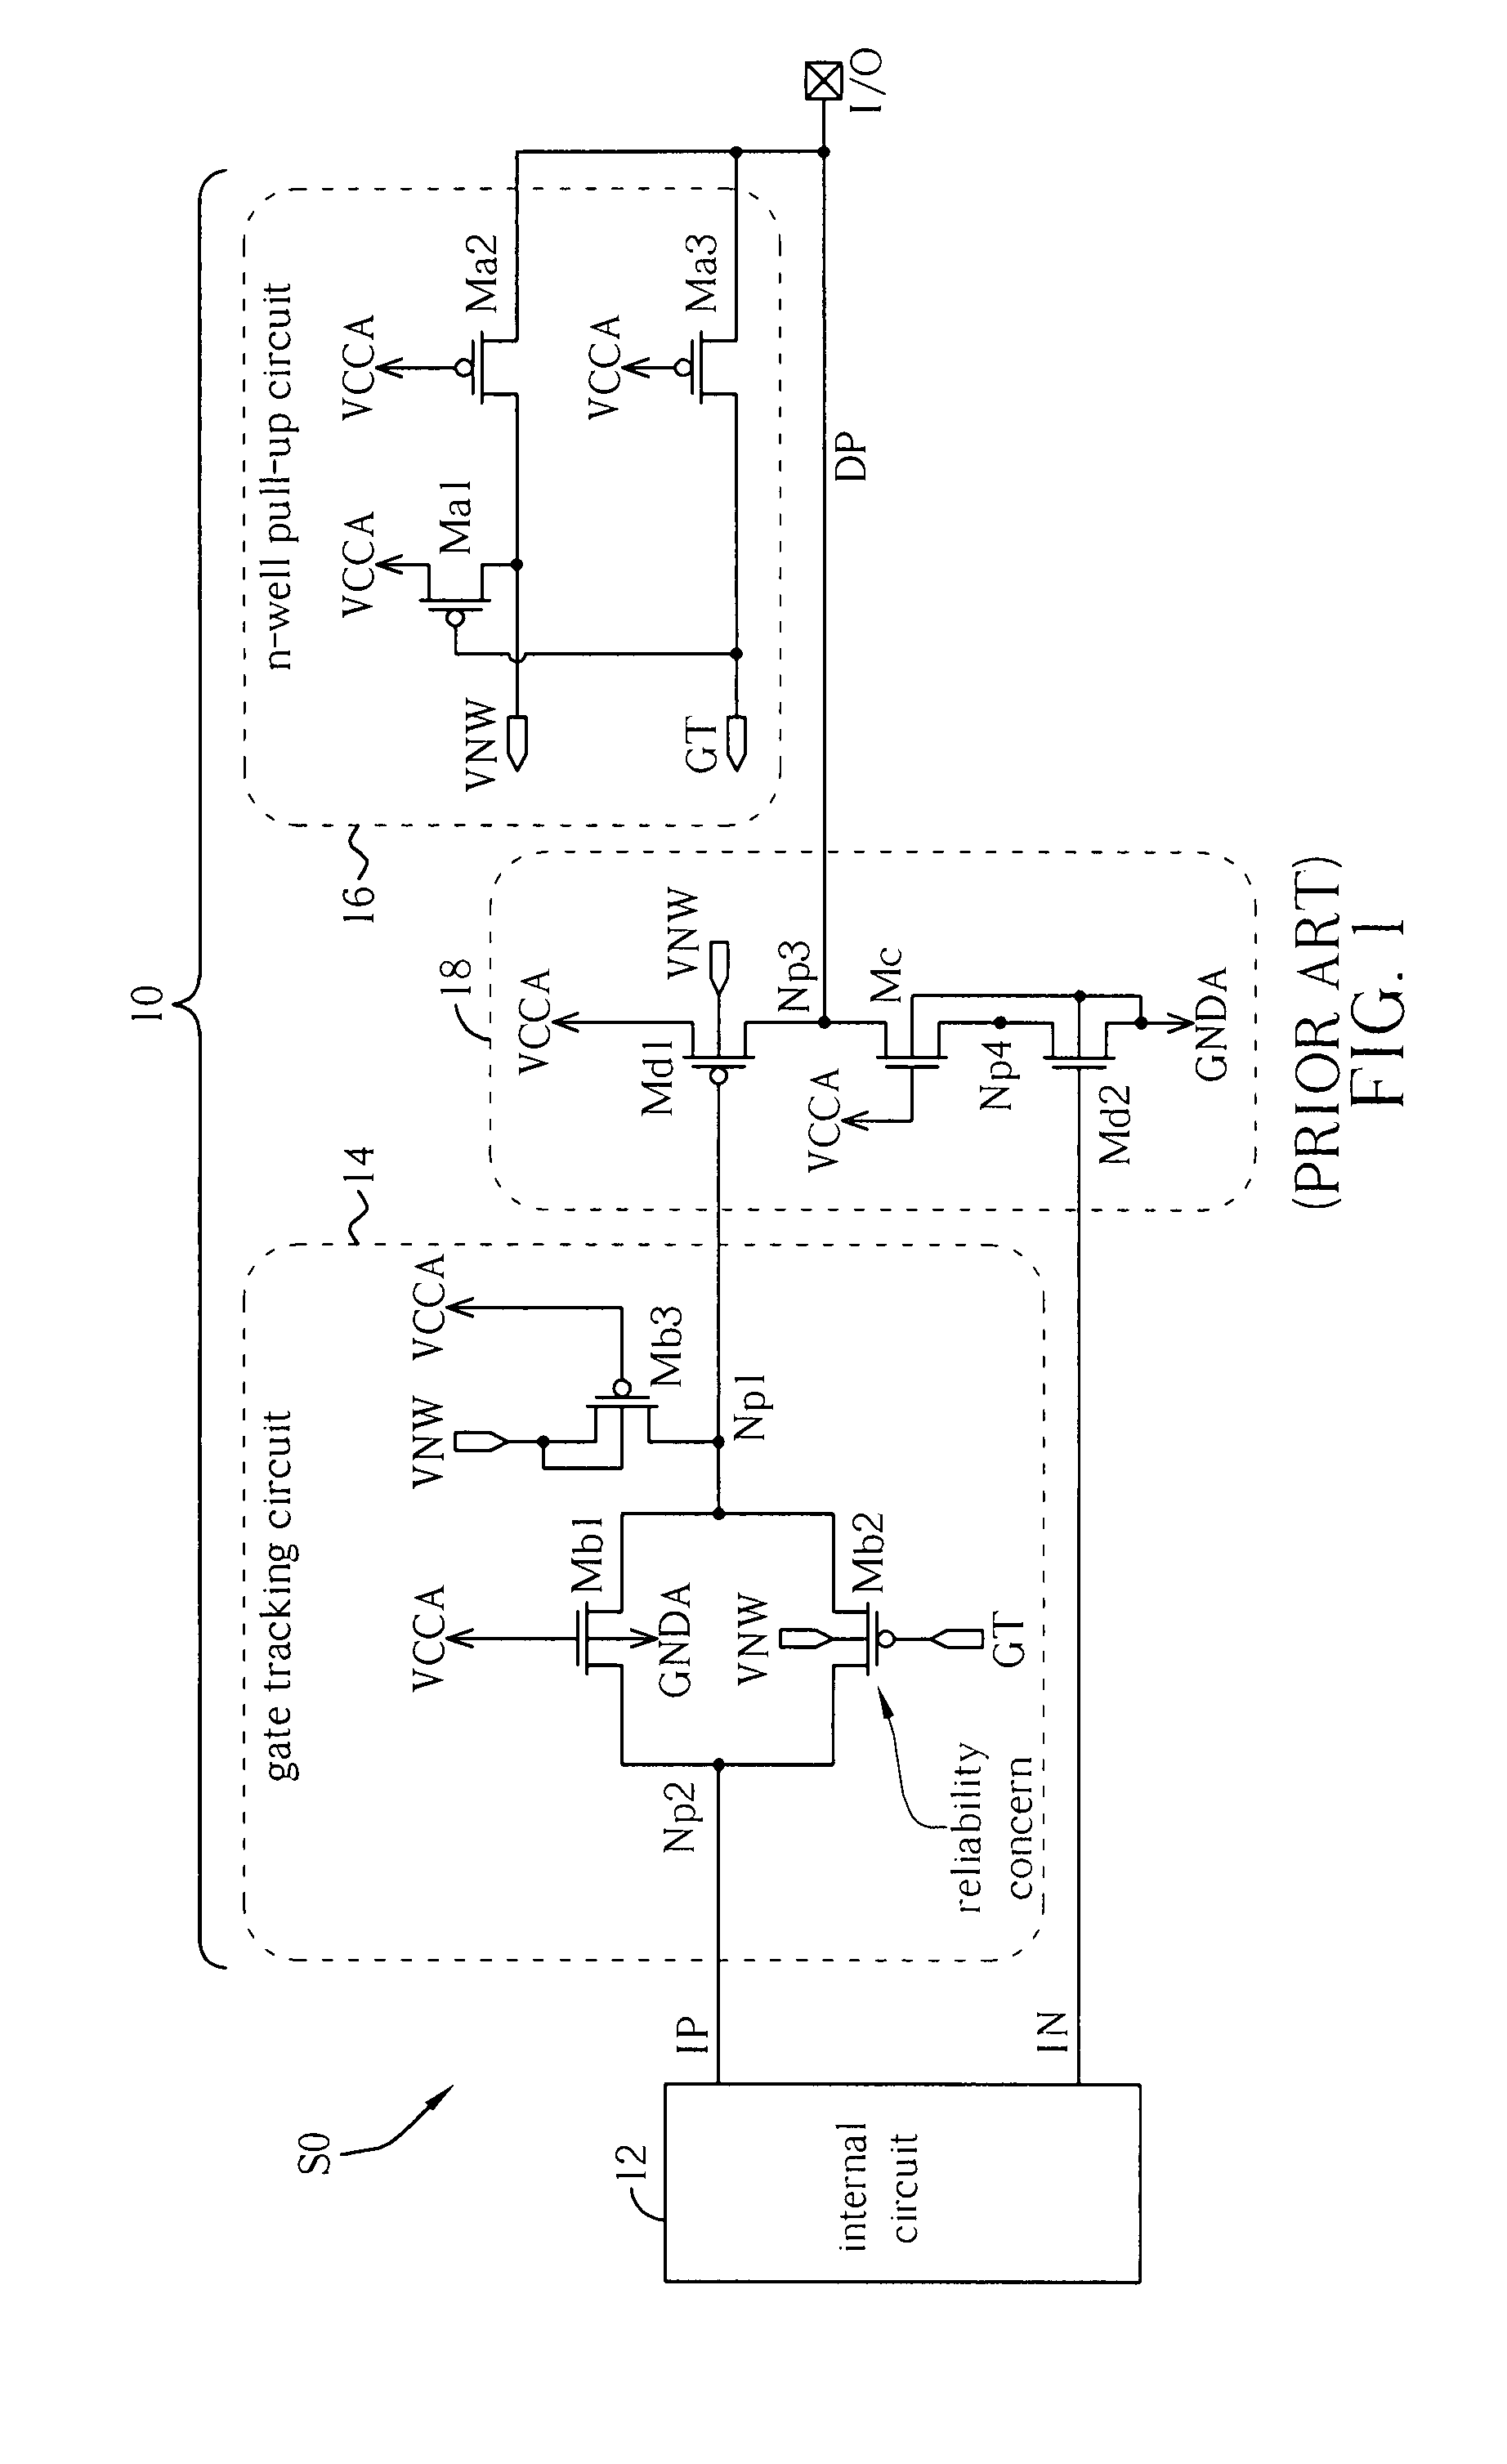 Over-voltage indicator and related circuit and method